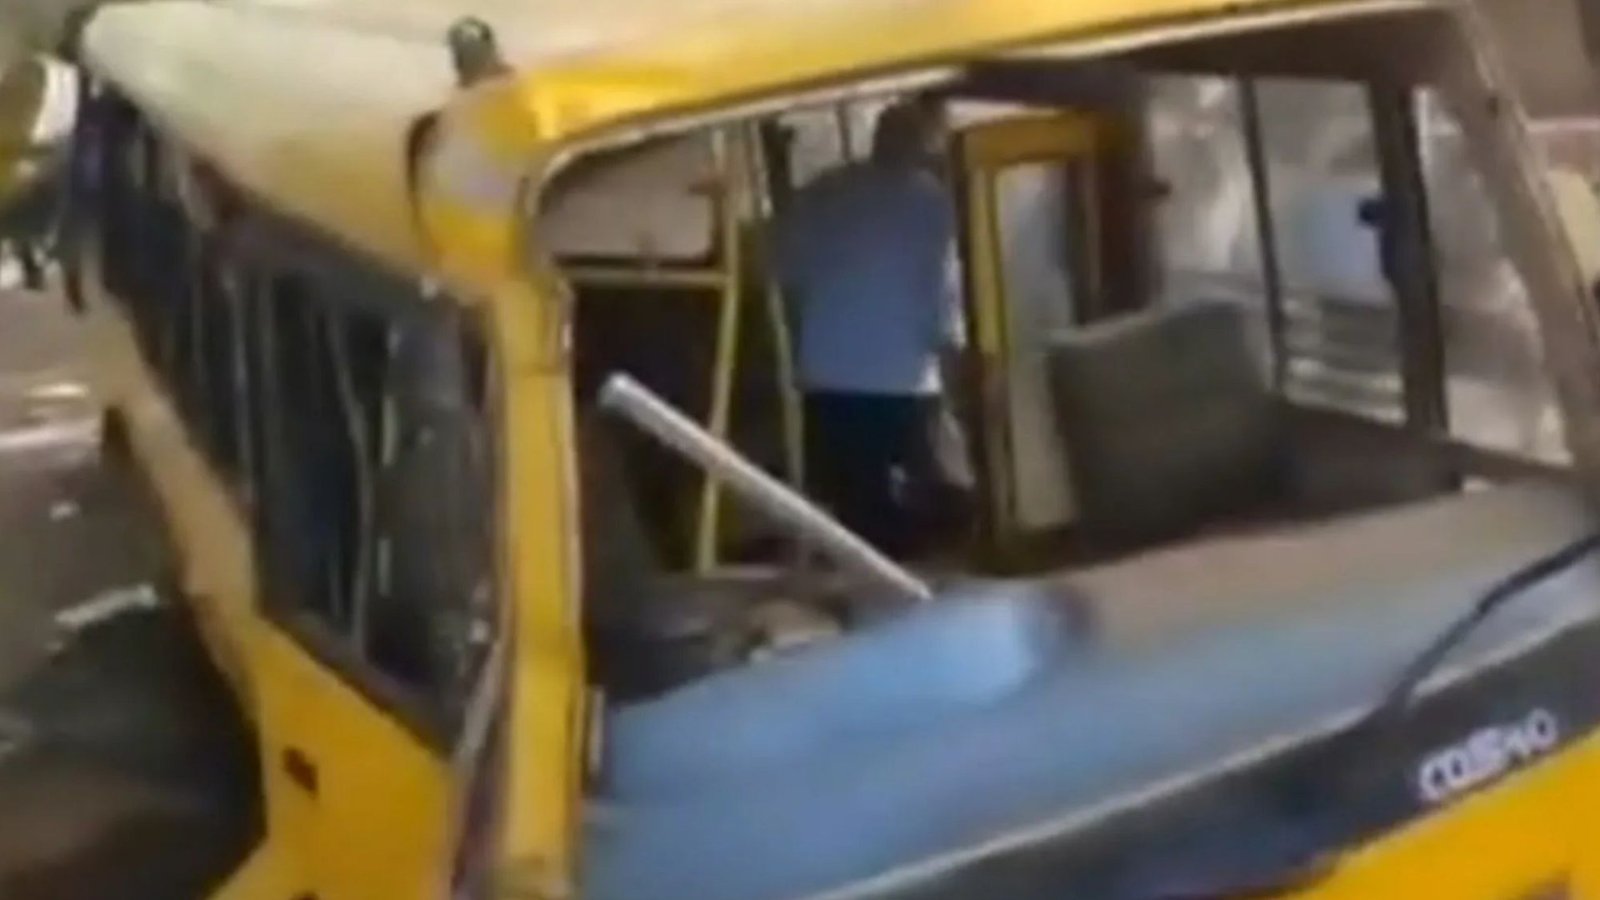 At least six children dead 15 injured in horror school bus crash as drunk driver overturns coach in India